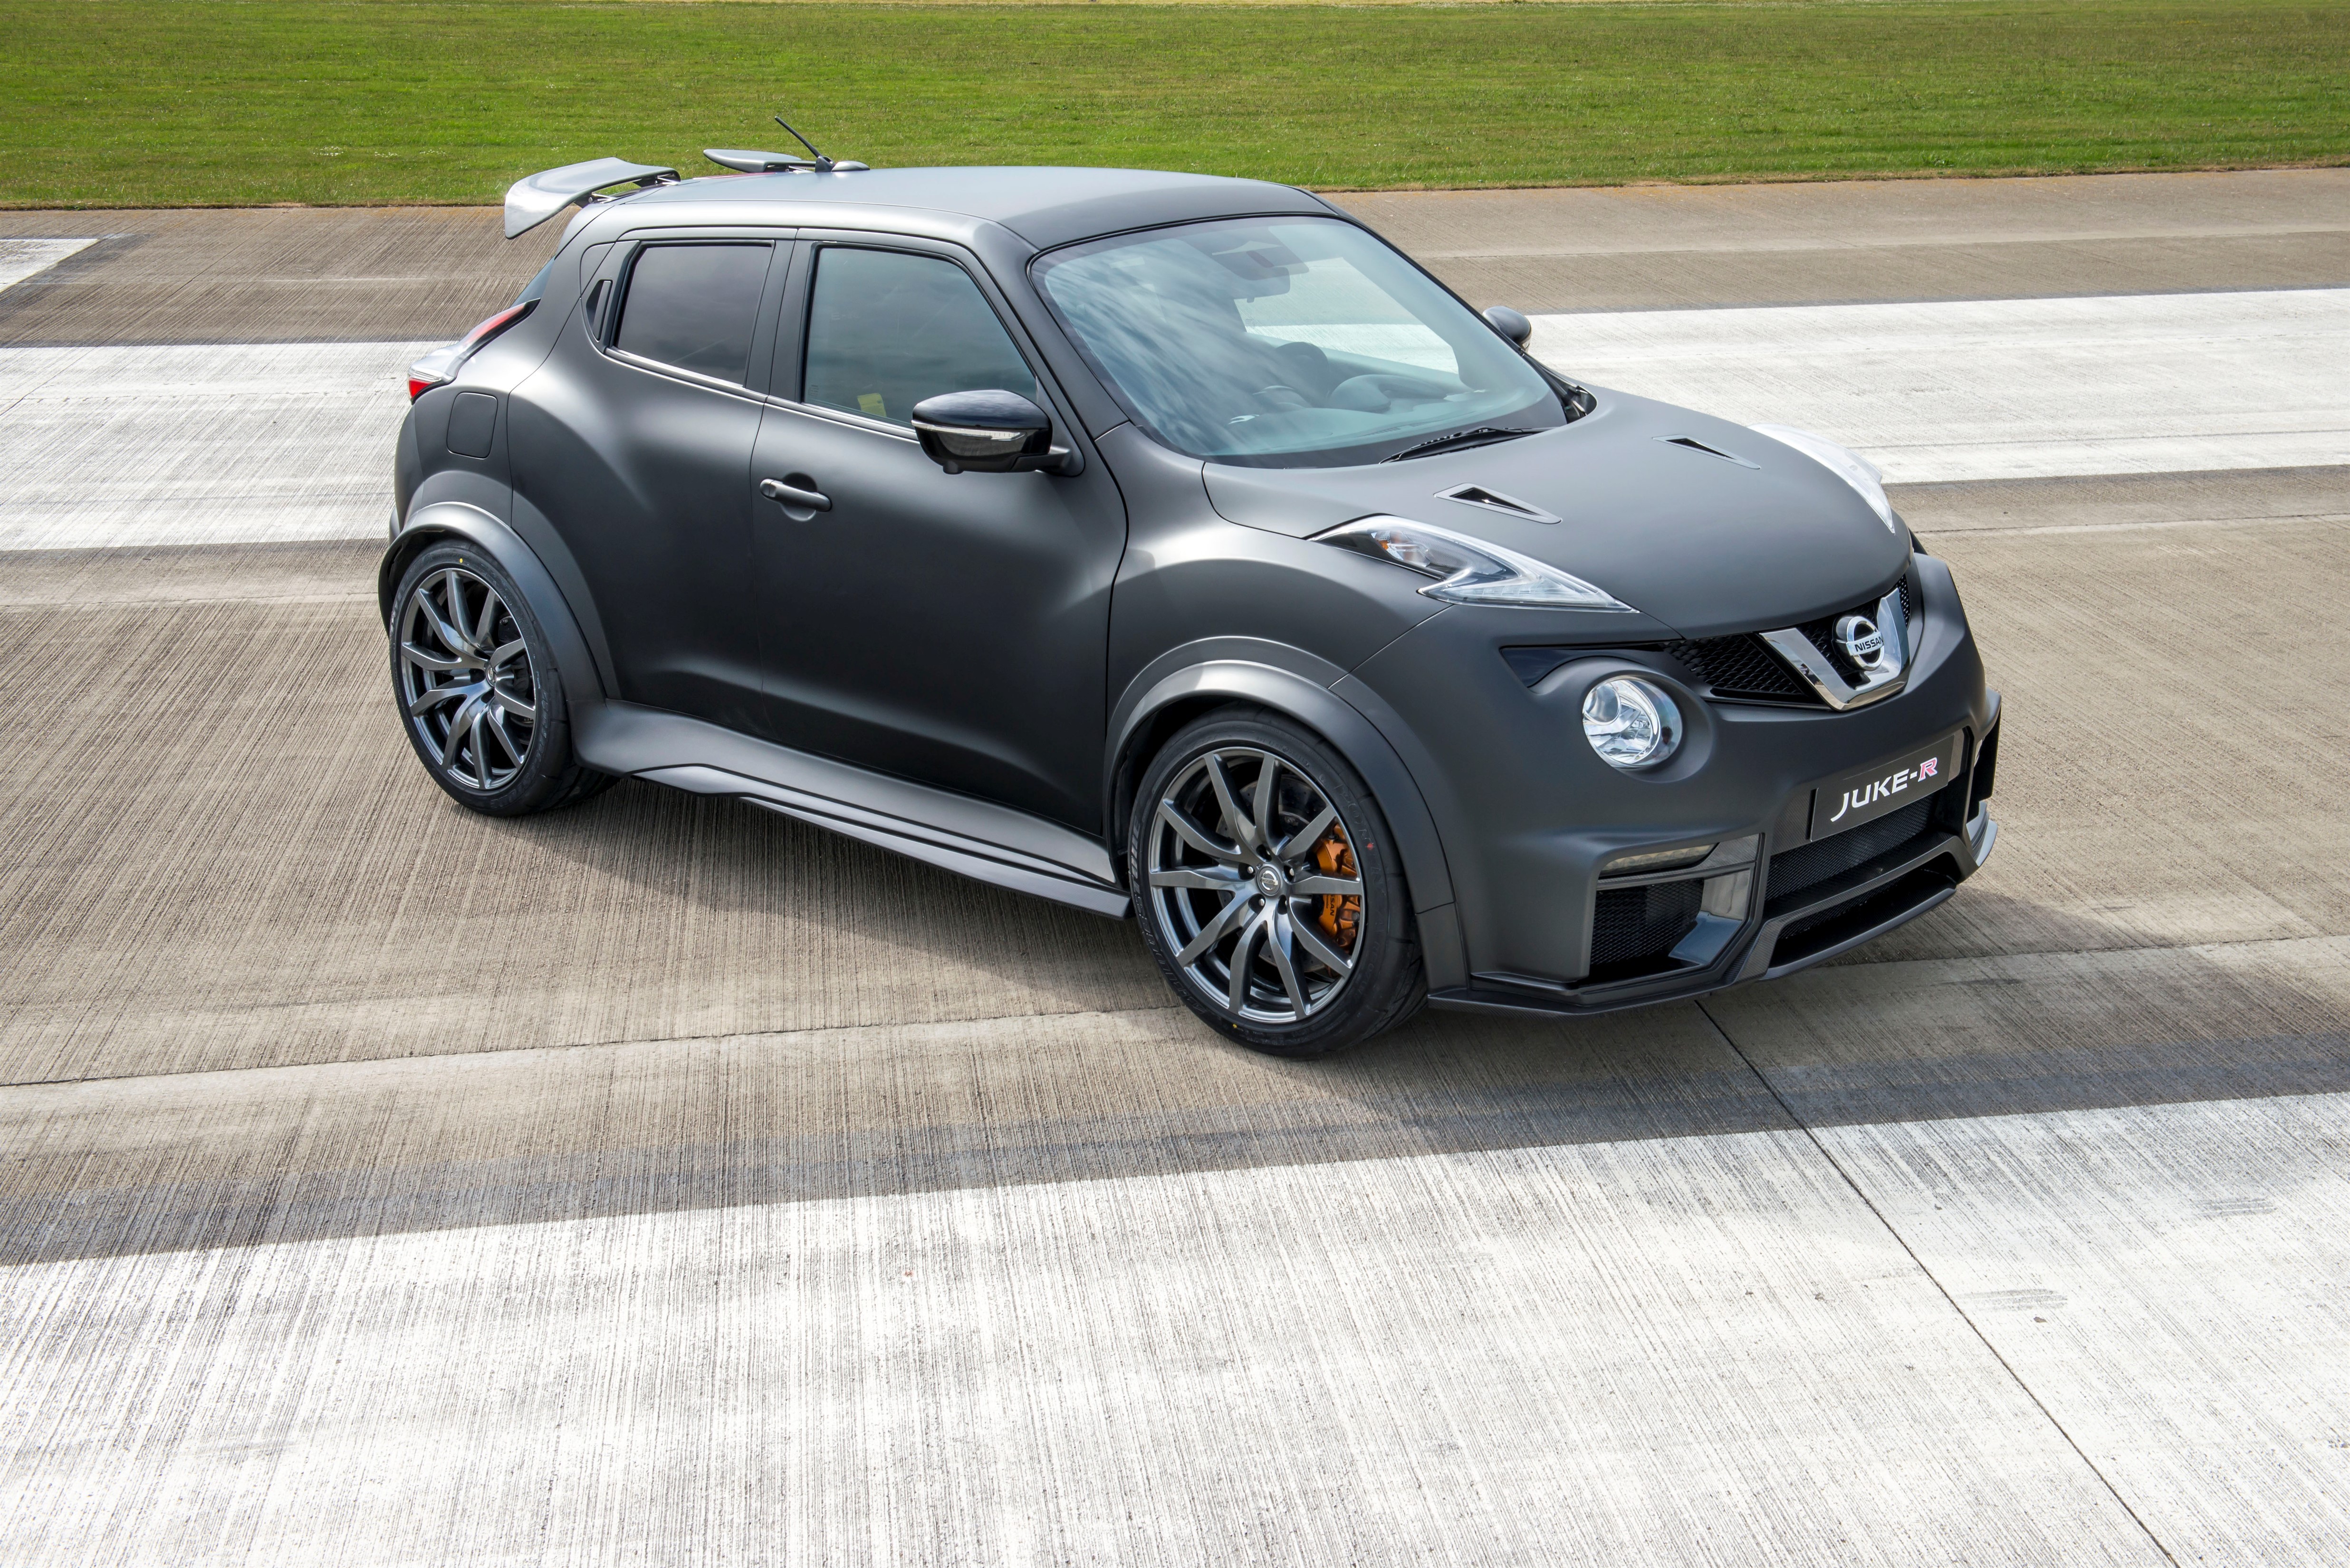 nissan-reportedly-planning-to-make-17-units-of-the-insane-juke-r-2-0